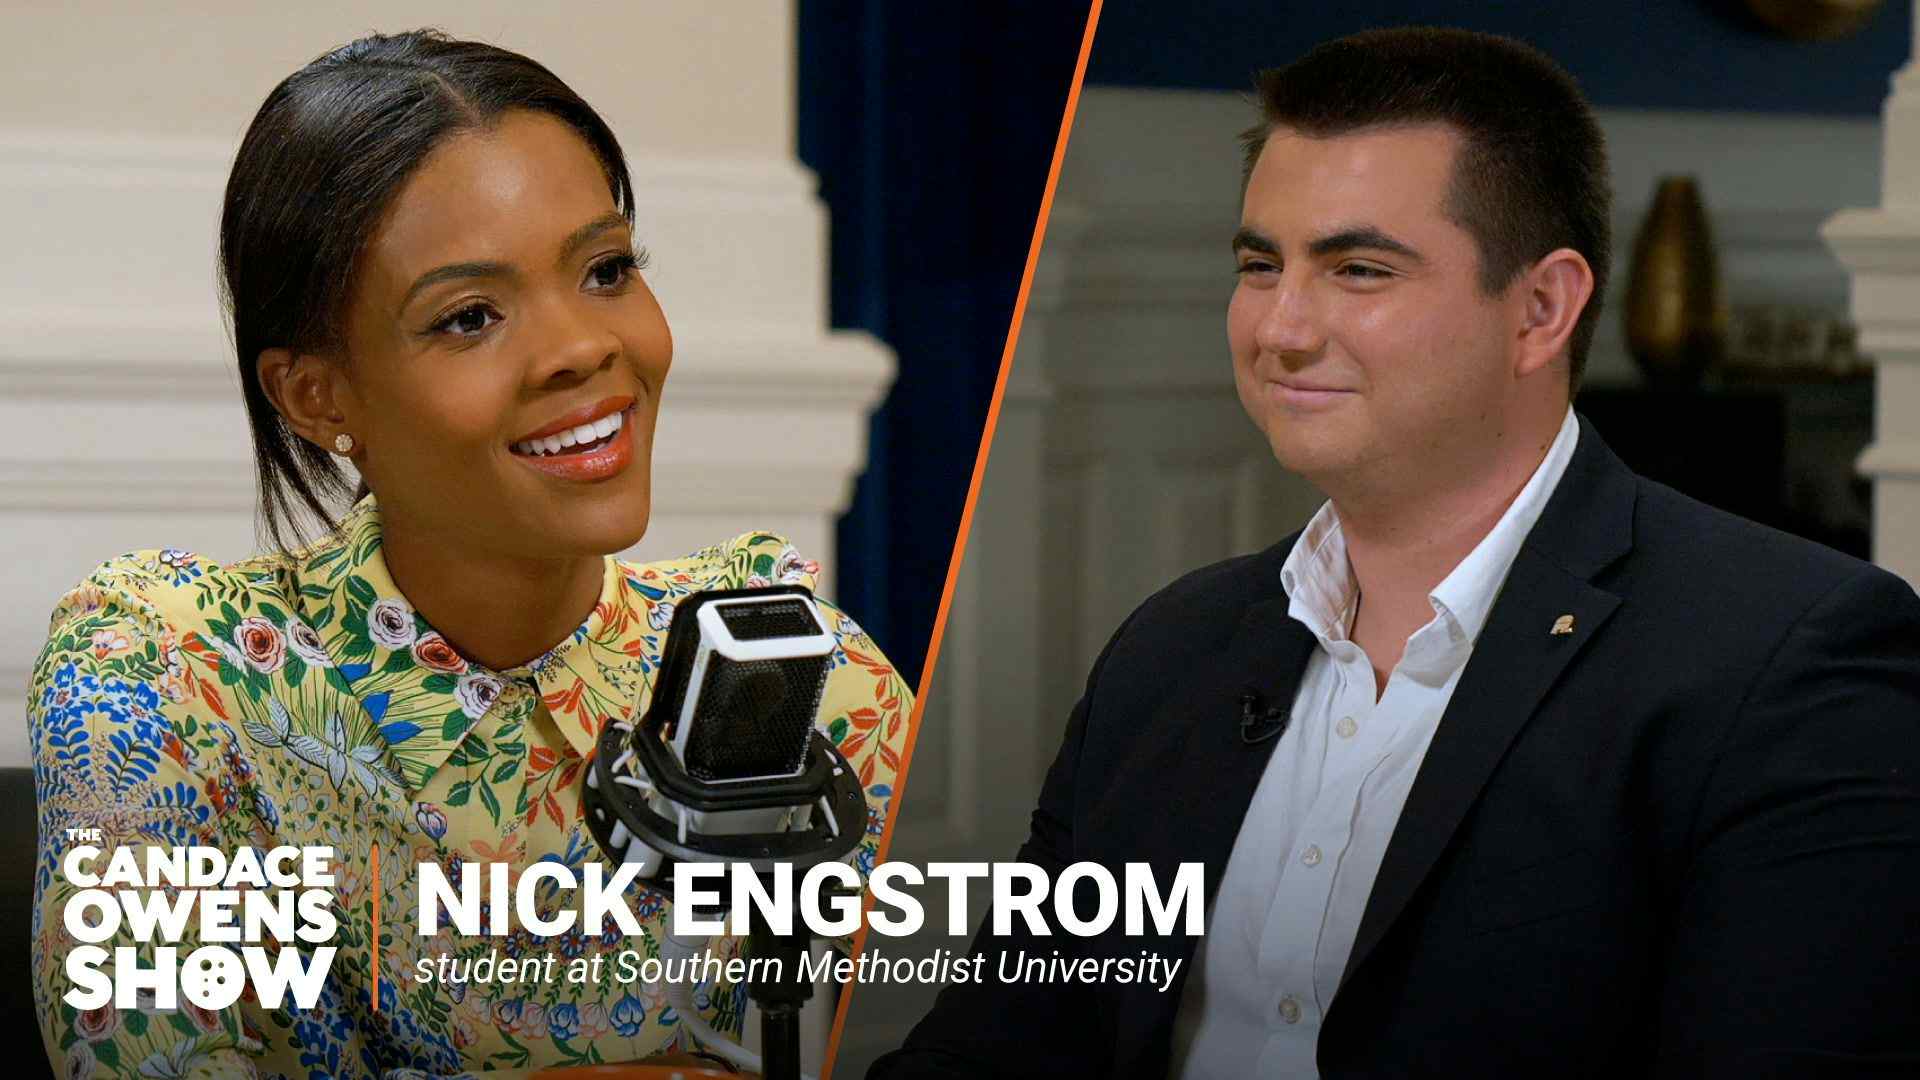 The Candace Owens Show: Nick Engstrom